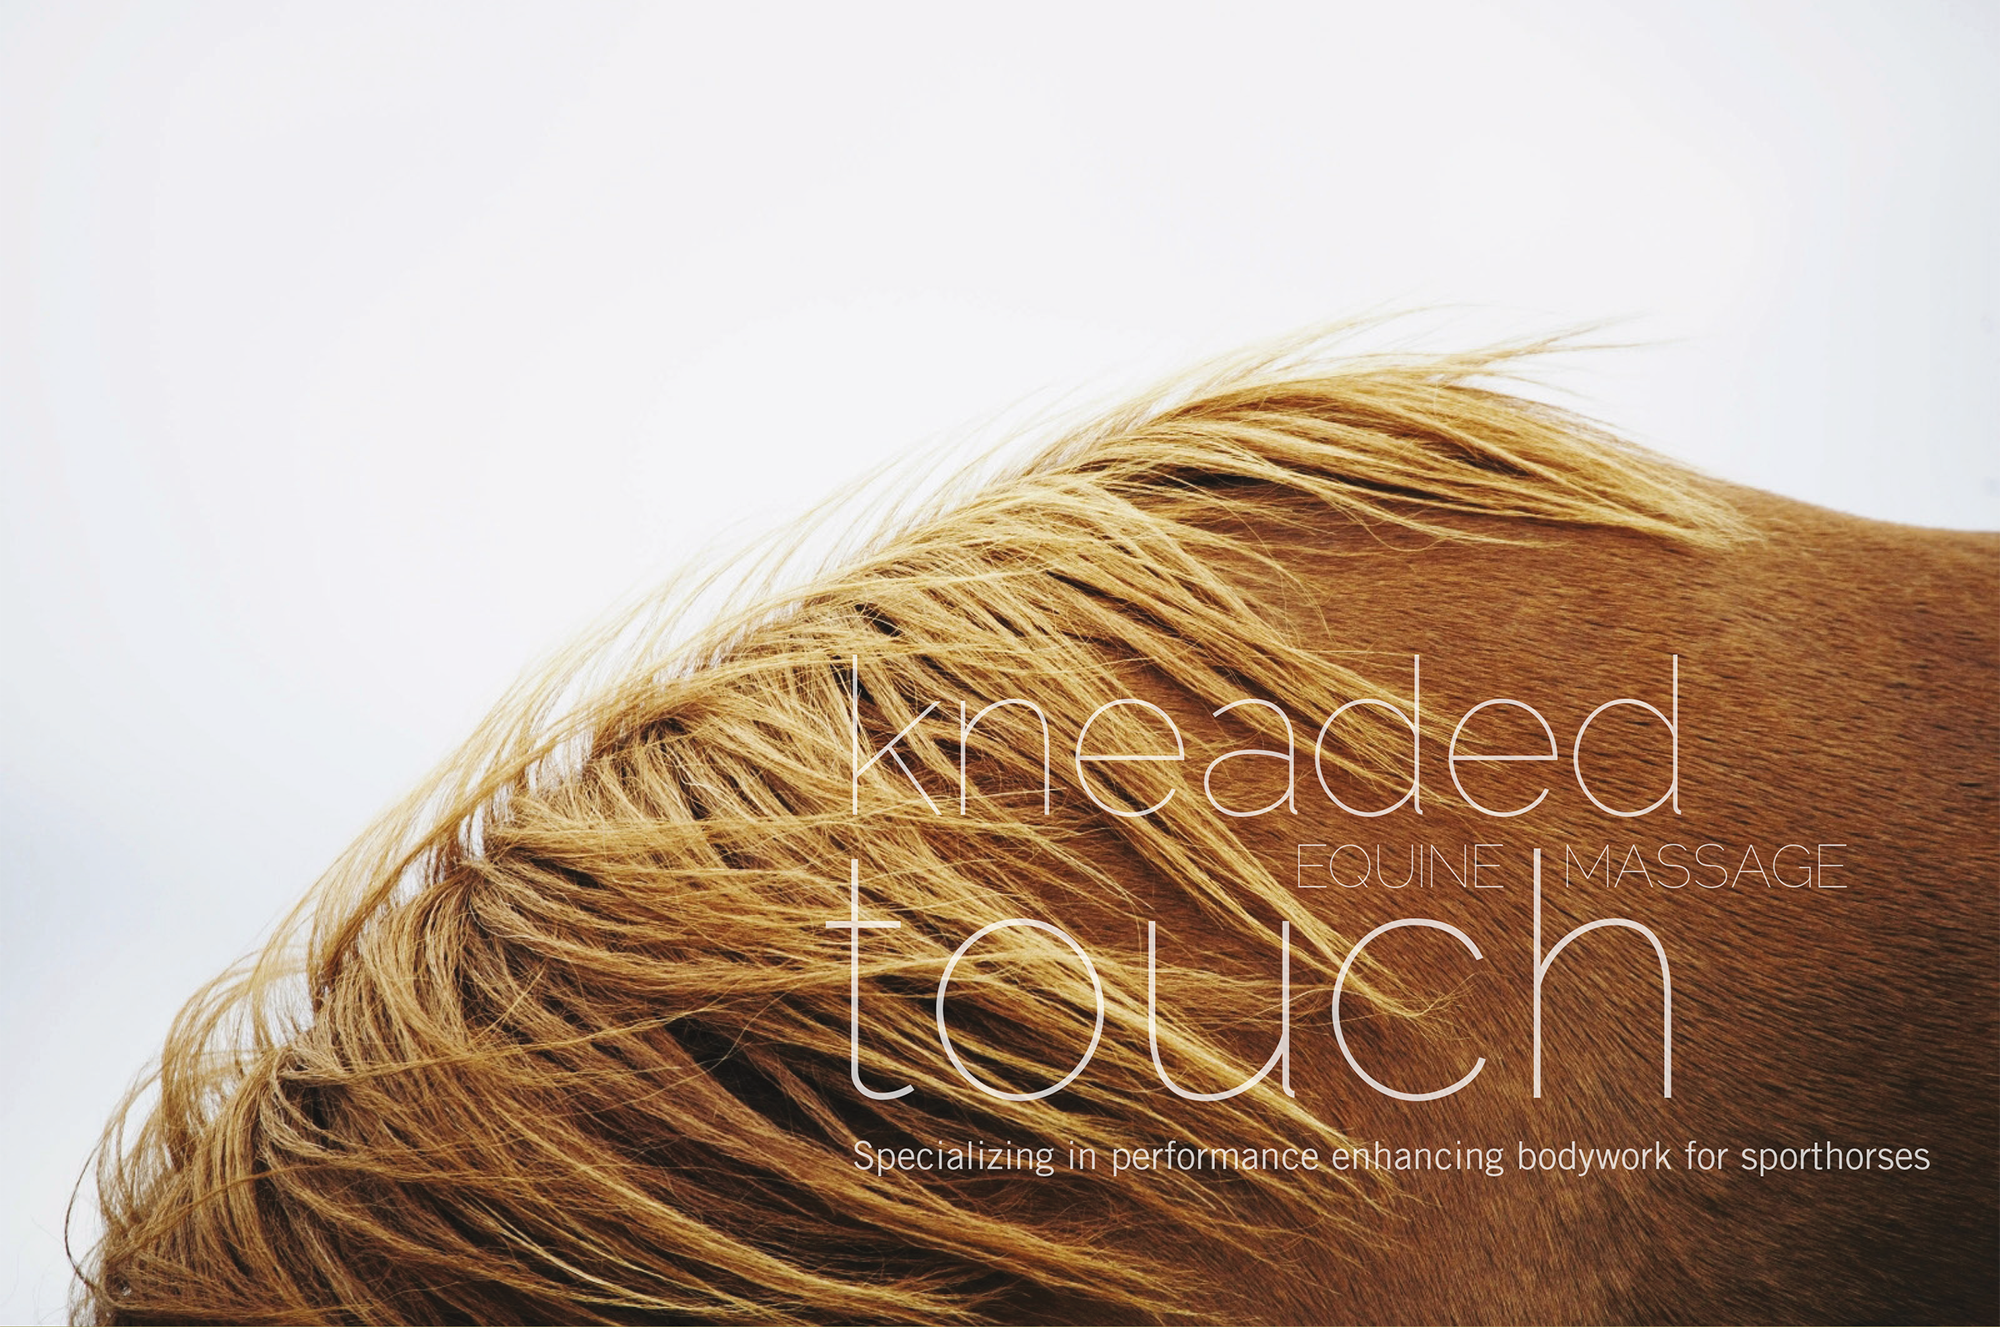 Logo + Identity for Kneaded Touch Equine Massage 